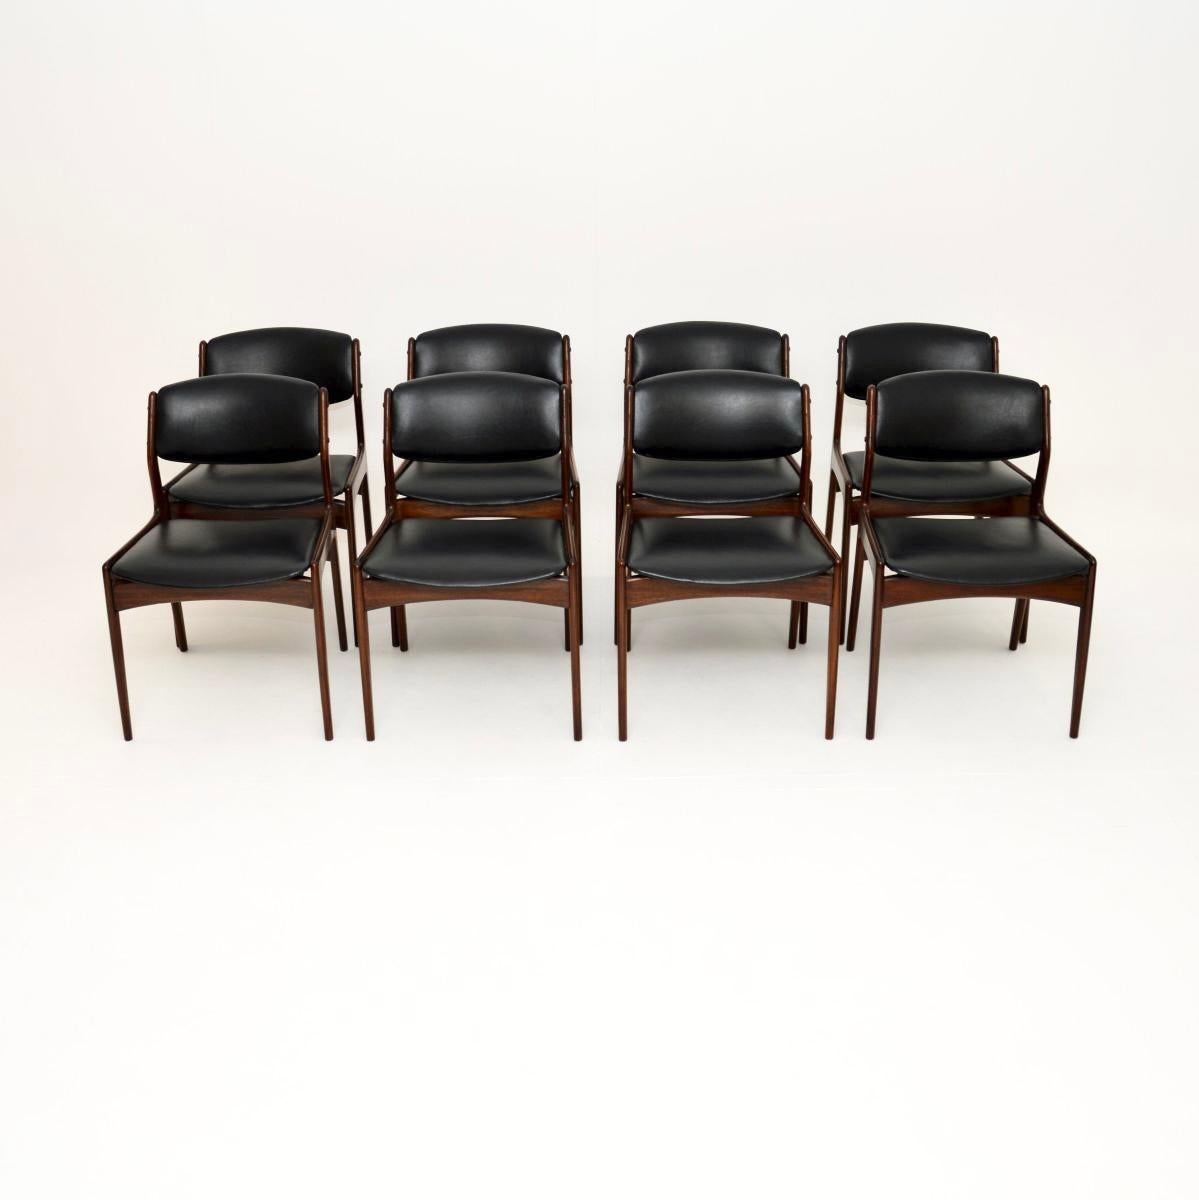 A stunning set of eight Danish vintage dining chairs, dating from the 1960’s.

The are of outstanding quality, with a stylish, elegant and sturdy design. They look amazing from all angles with beautifully tapered legs and lovely proportions. They